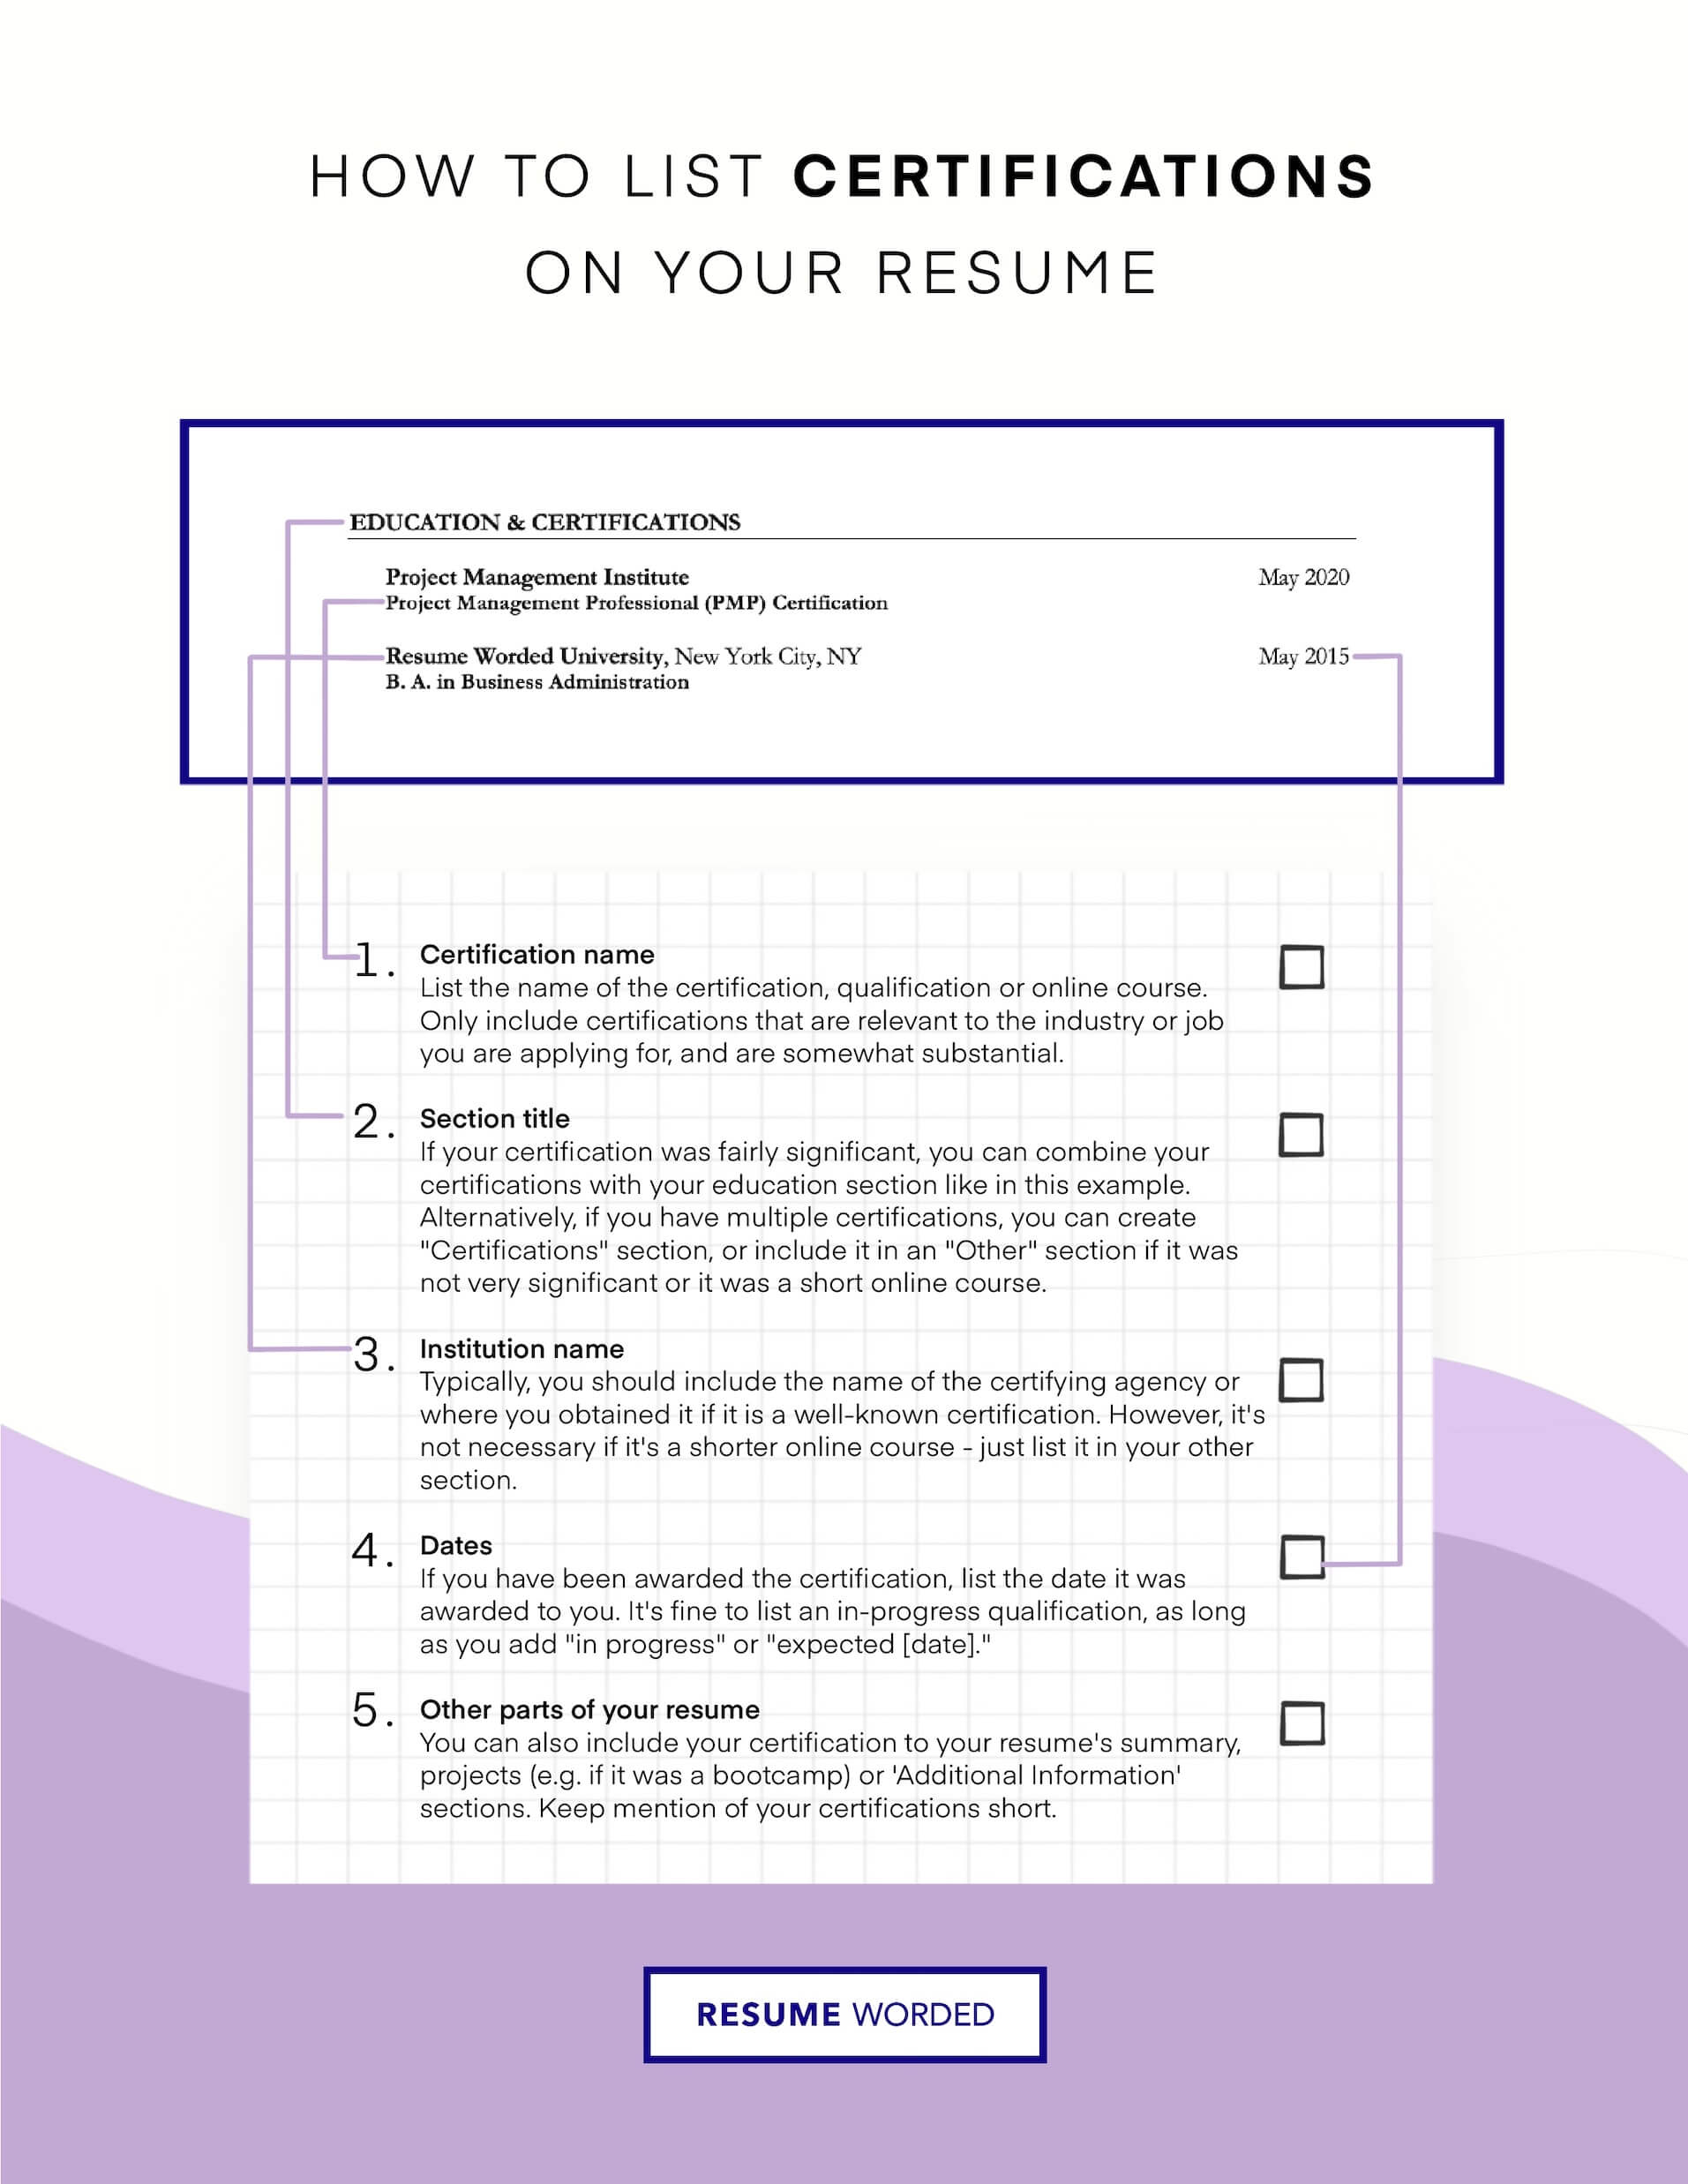 Get relevant certification. - Entry-Level Executive Assistant Resume